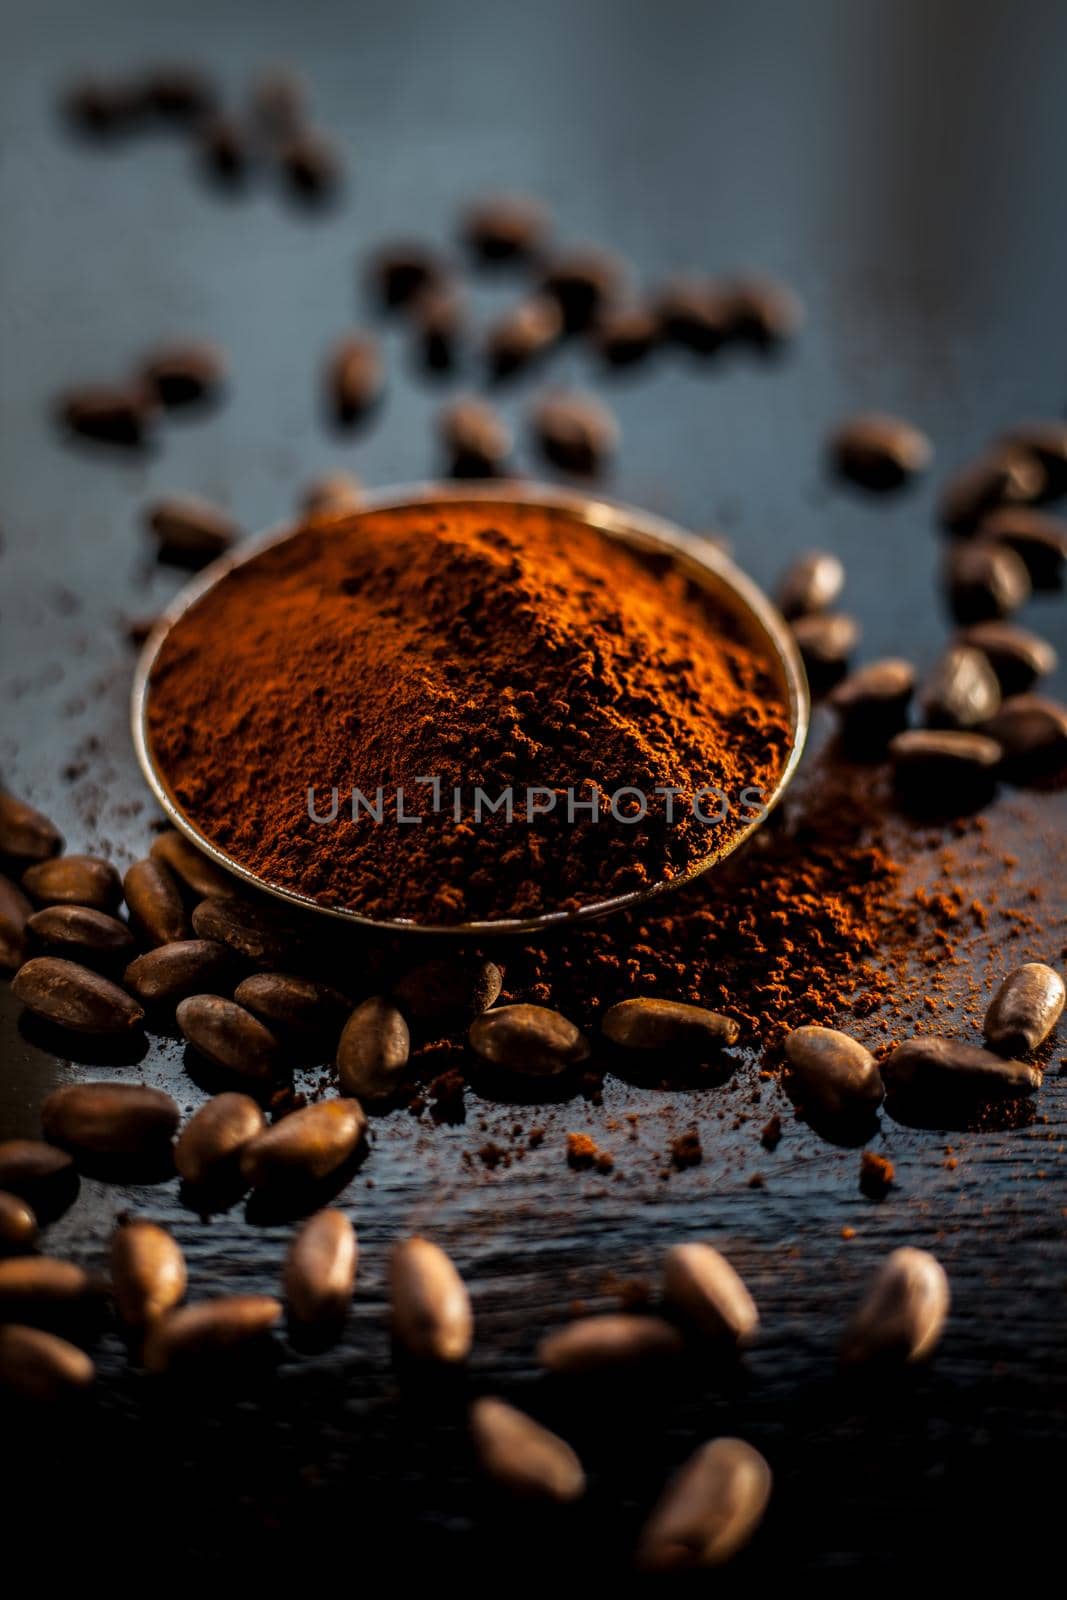 Shot of raw coffee beans and powder on a black surface.